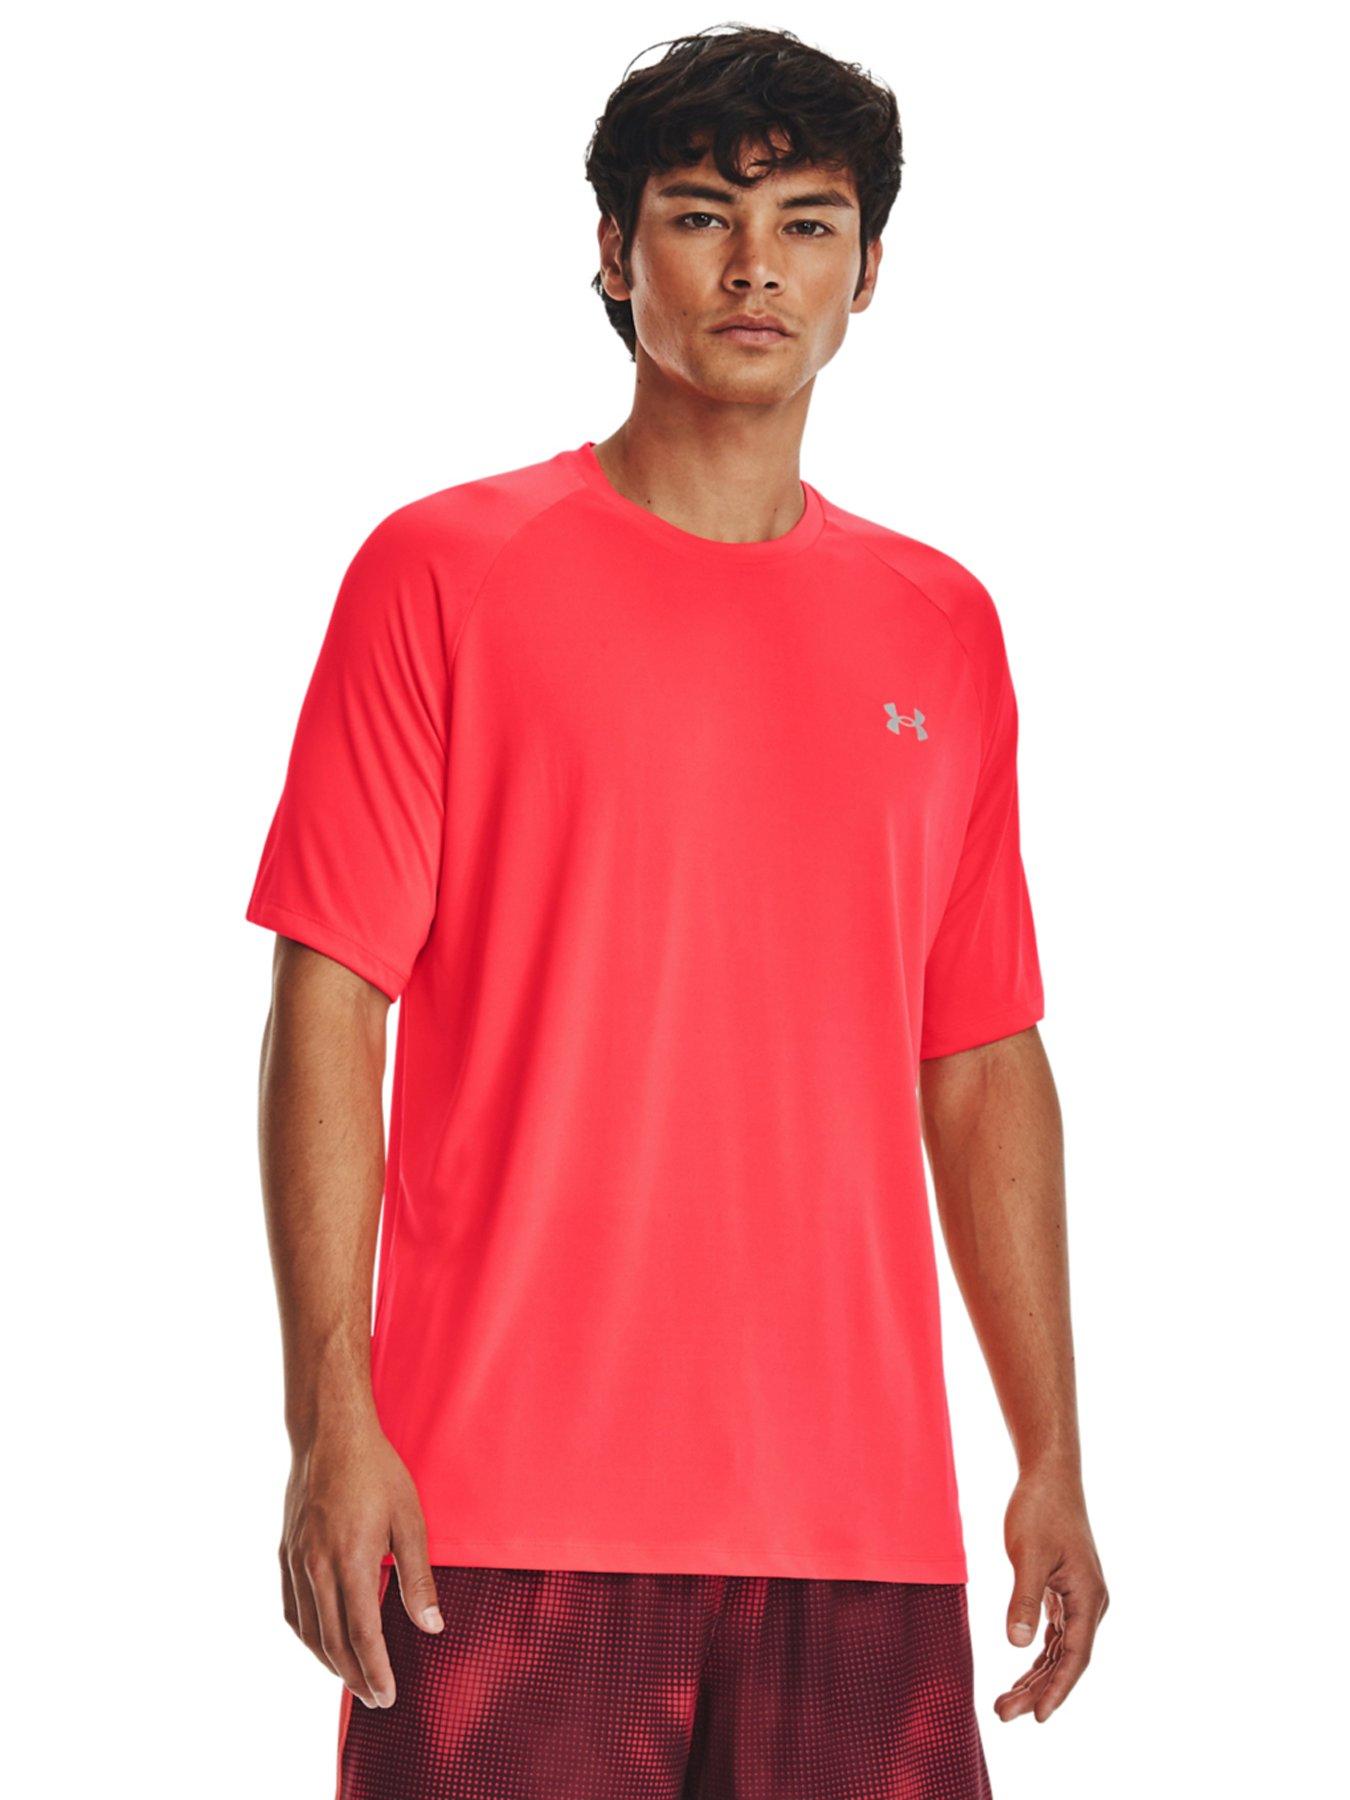 Under Armour 100% Polyester Solid Pink Active T-Shirt Size XL - 50% off